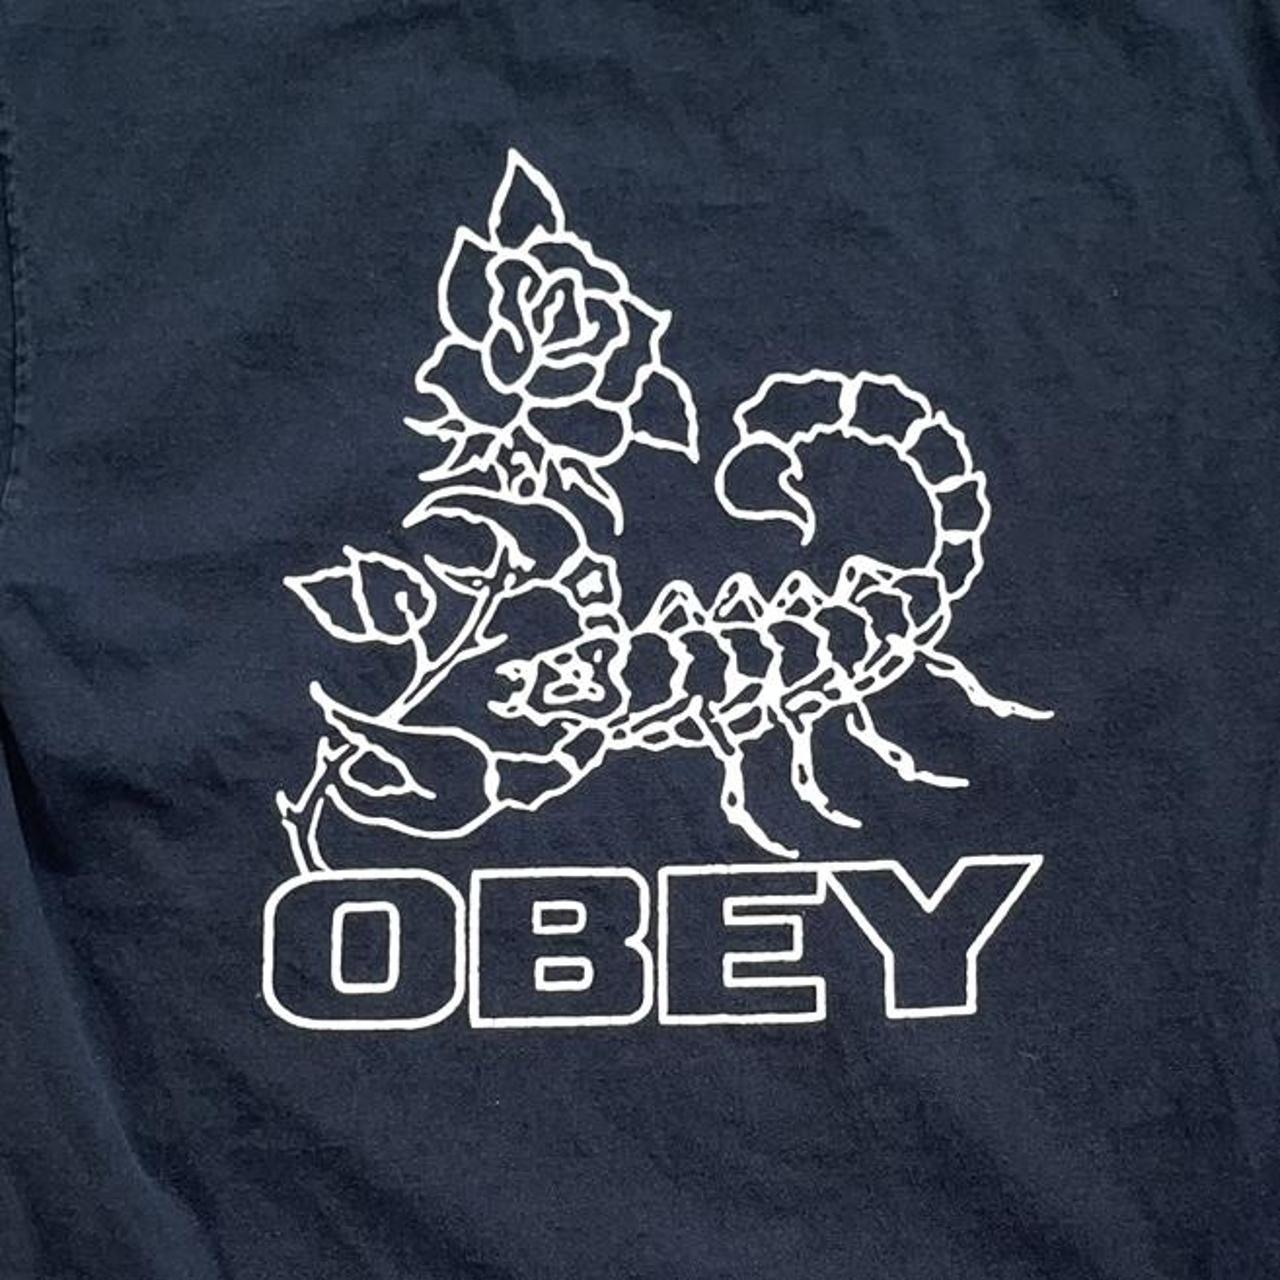 Obey Men's Black and White T-shirt (4)